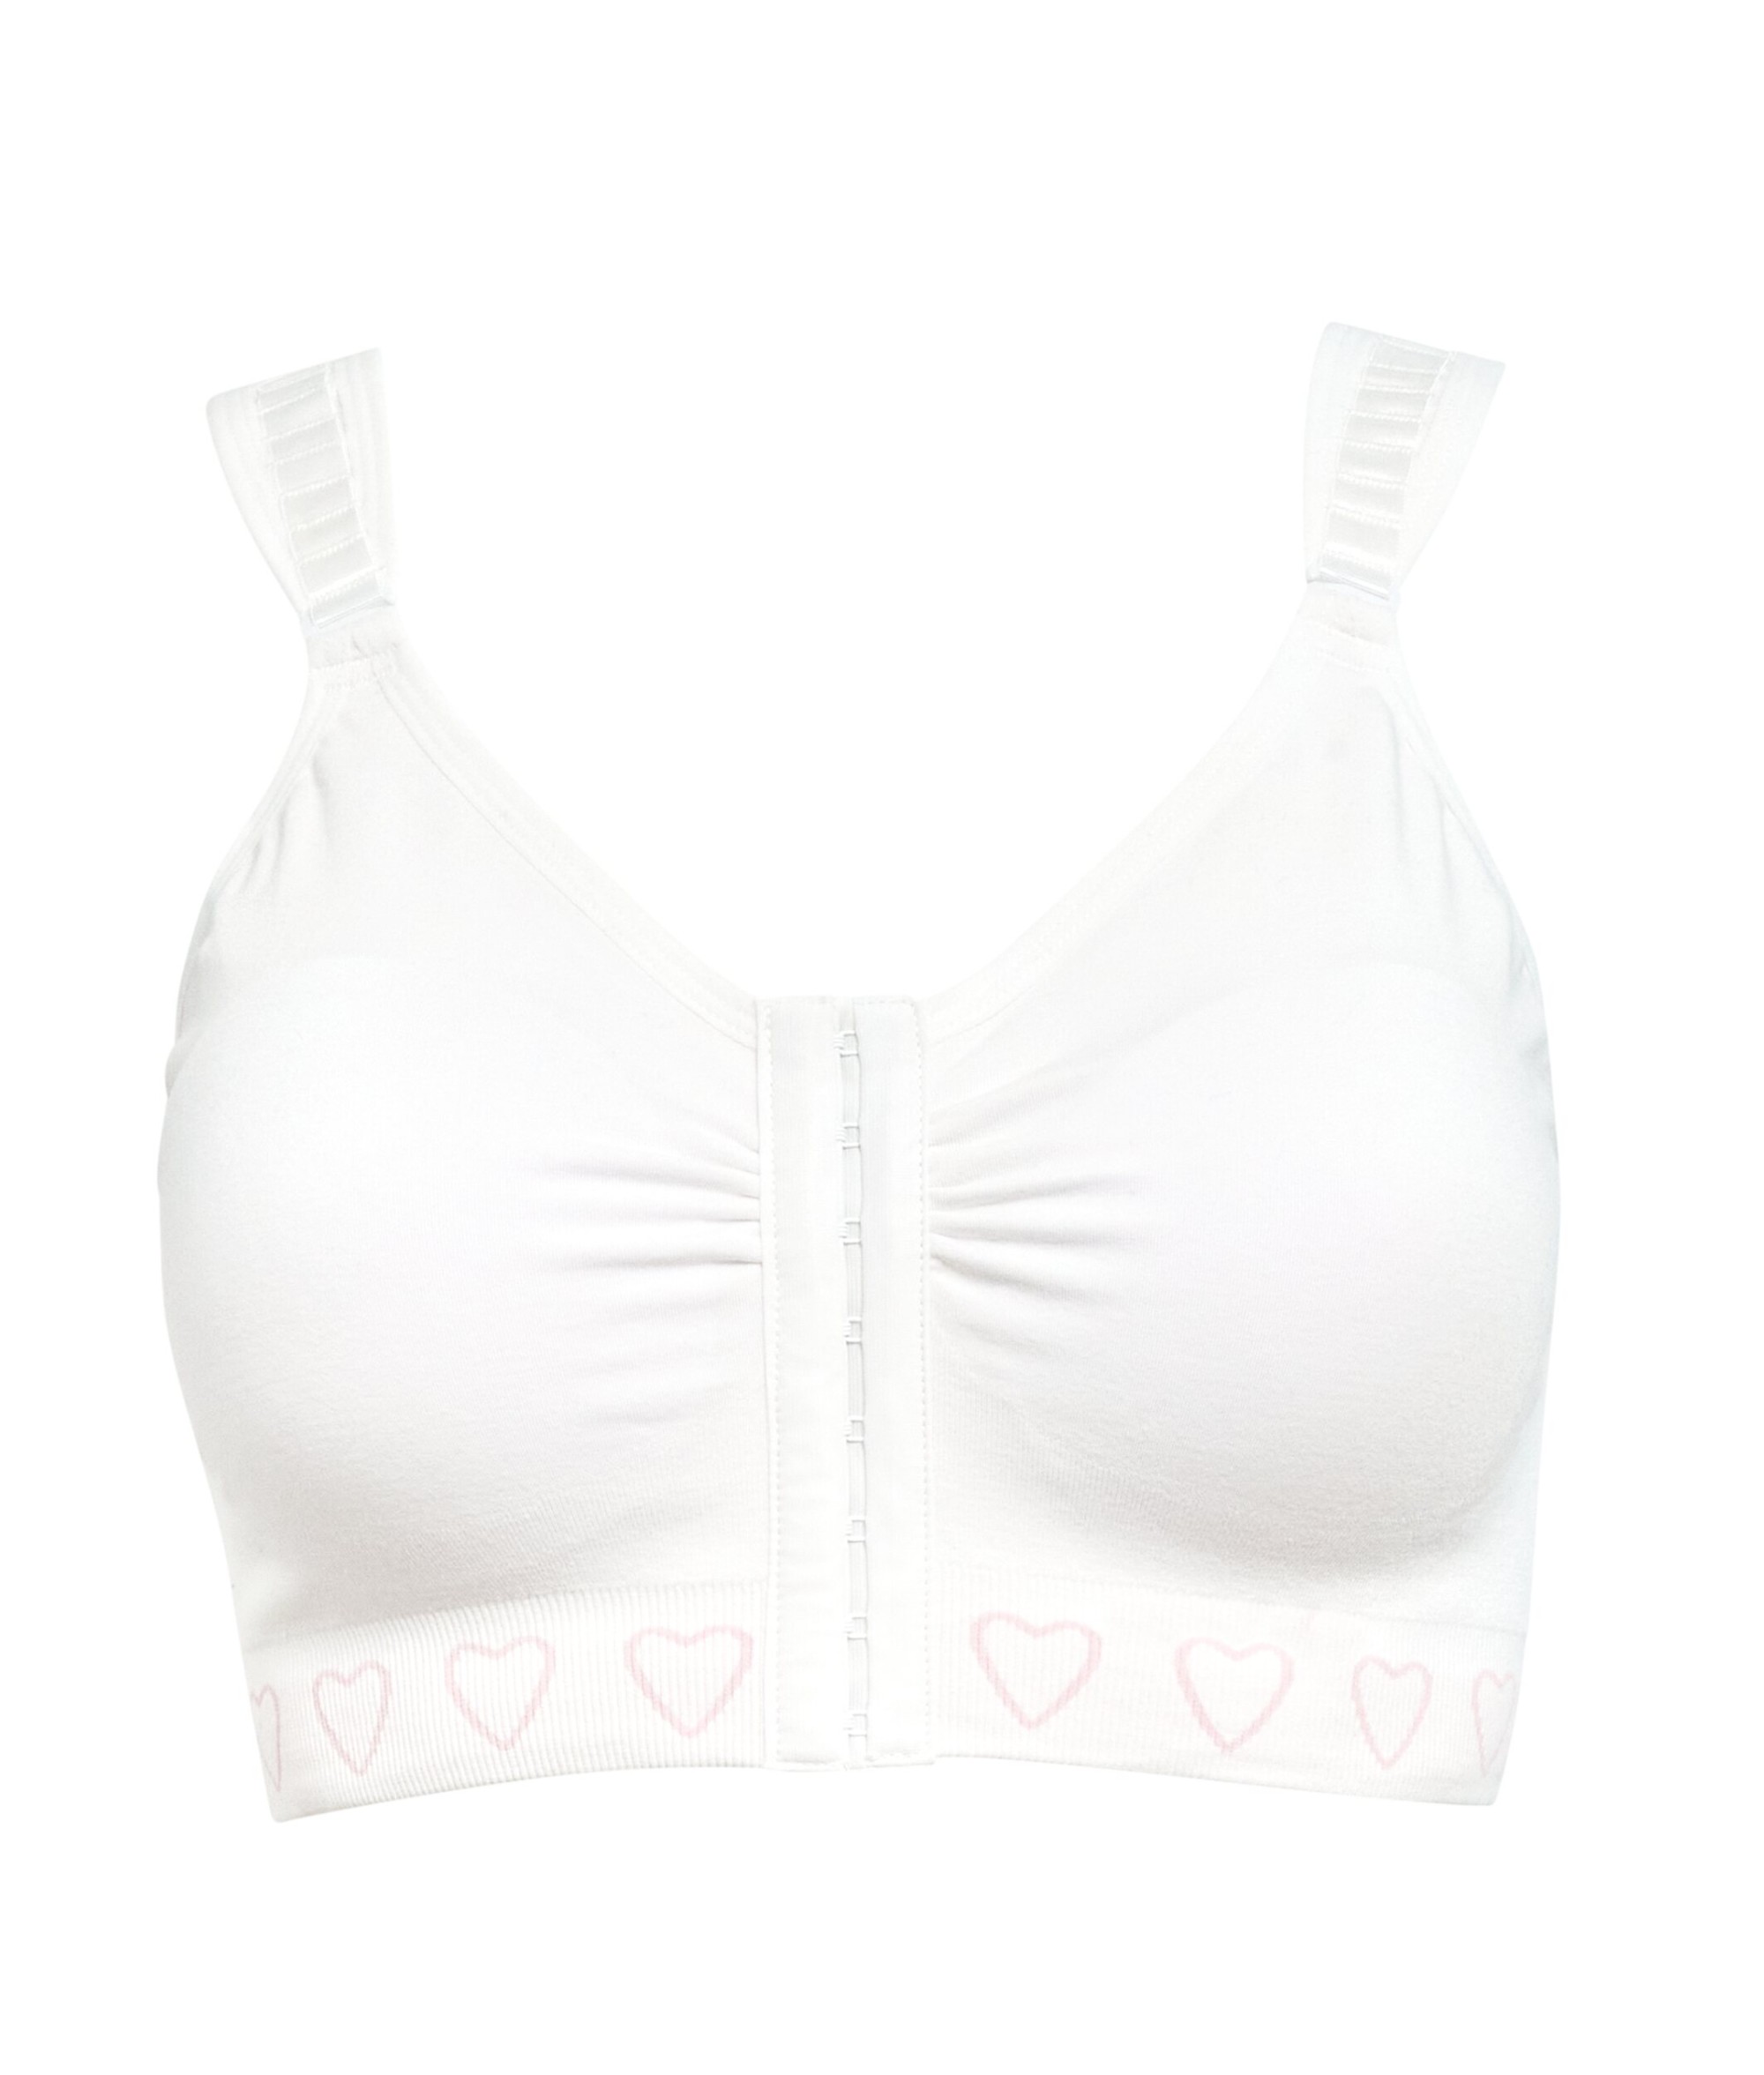 How to Buy a Mastectomy Bra  A Guide for Breast Cancer Patients